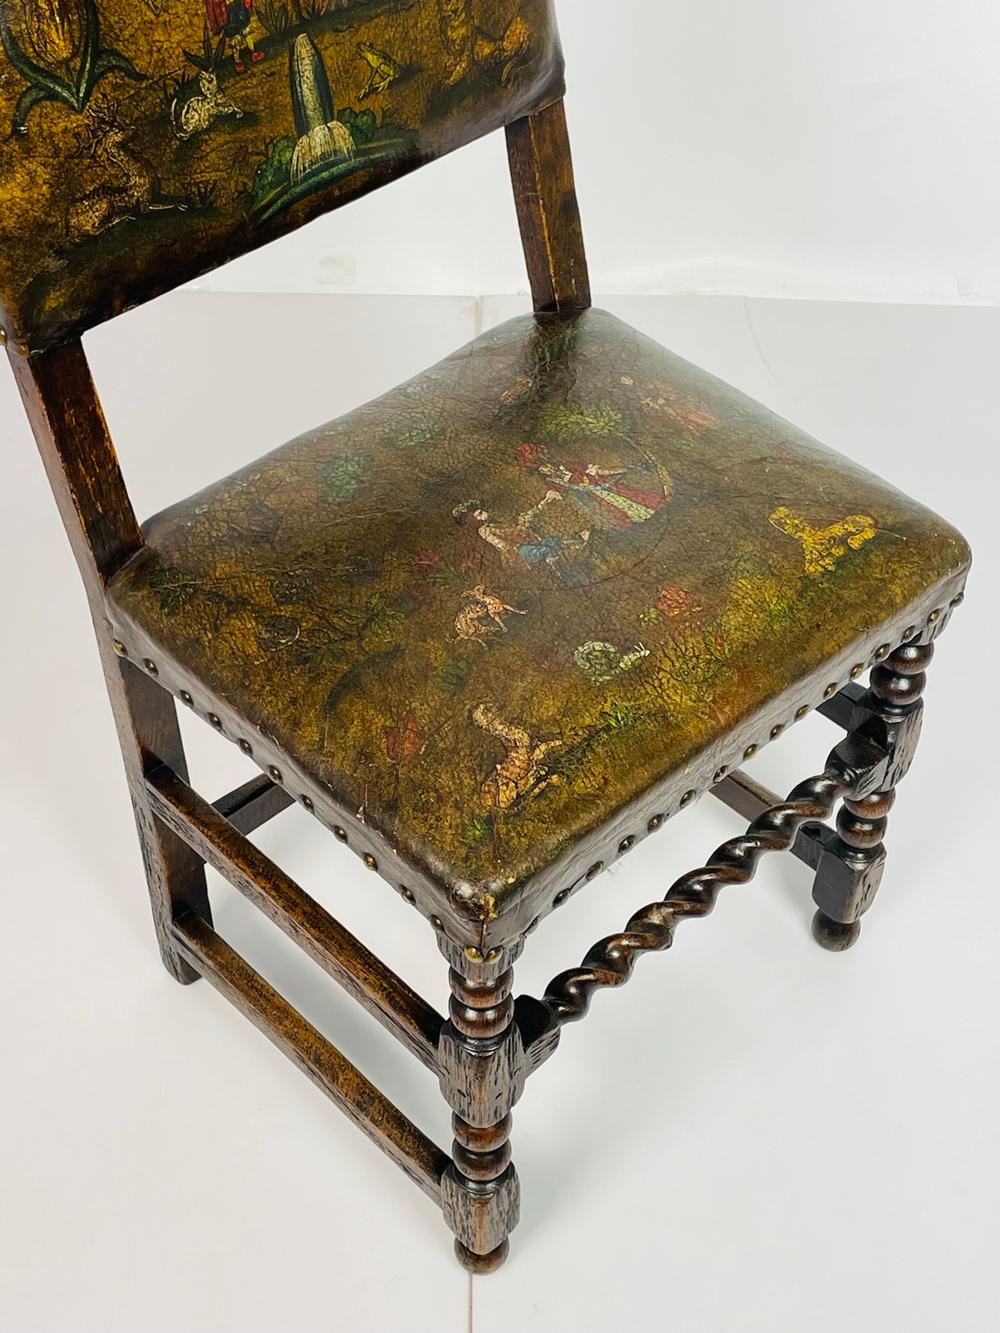 Antique Leather & Wood Chair With Painting on Seat & Backrest, Made in France 4